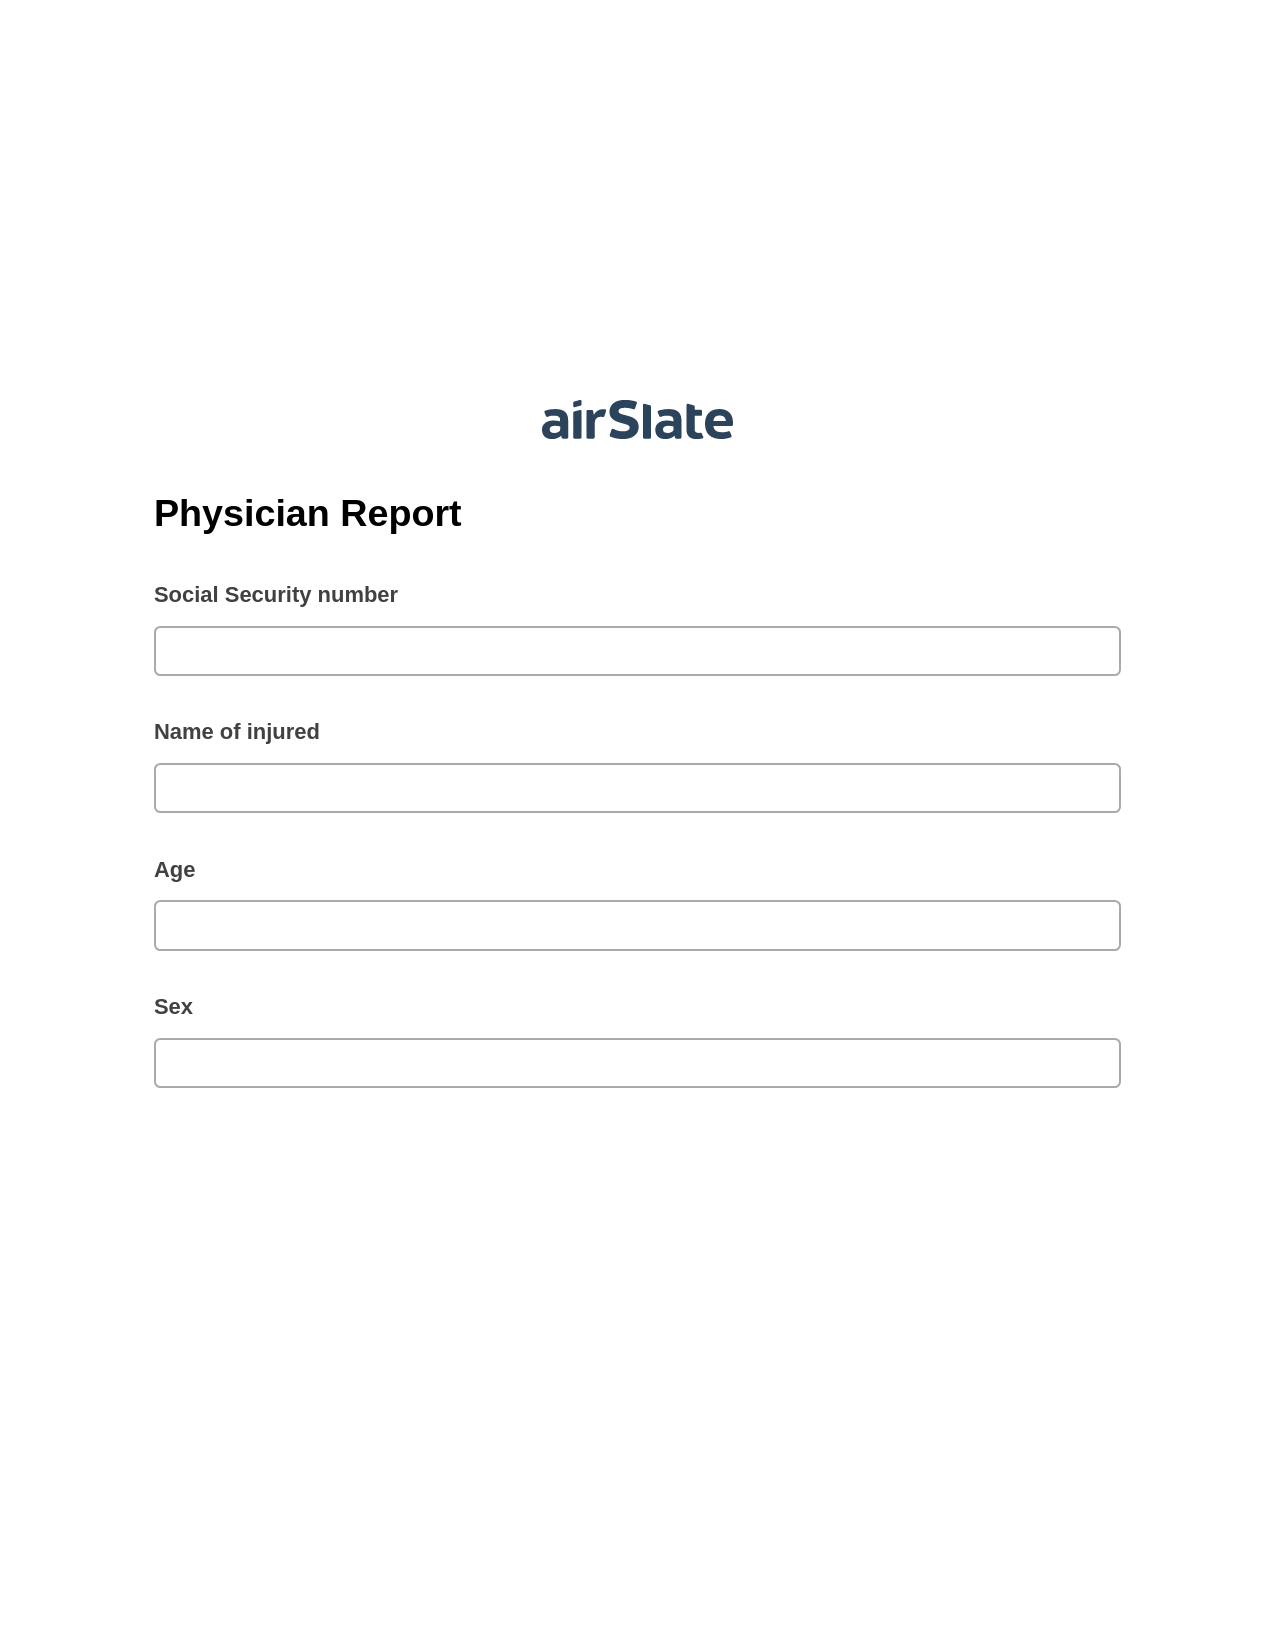 Physician Report Pre-fill Dropdowns from Airtable, Invoke Salesforce Process Bot, Archive to Google Drive Bot